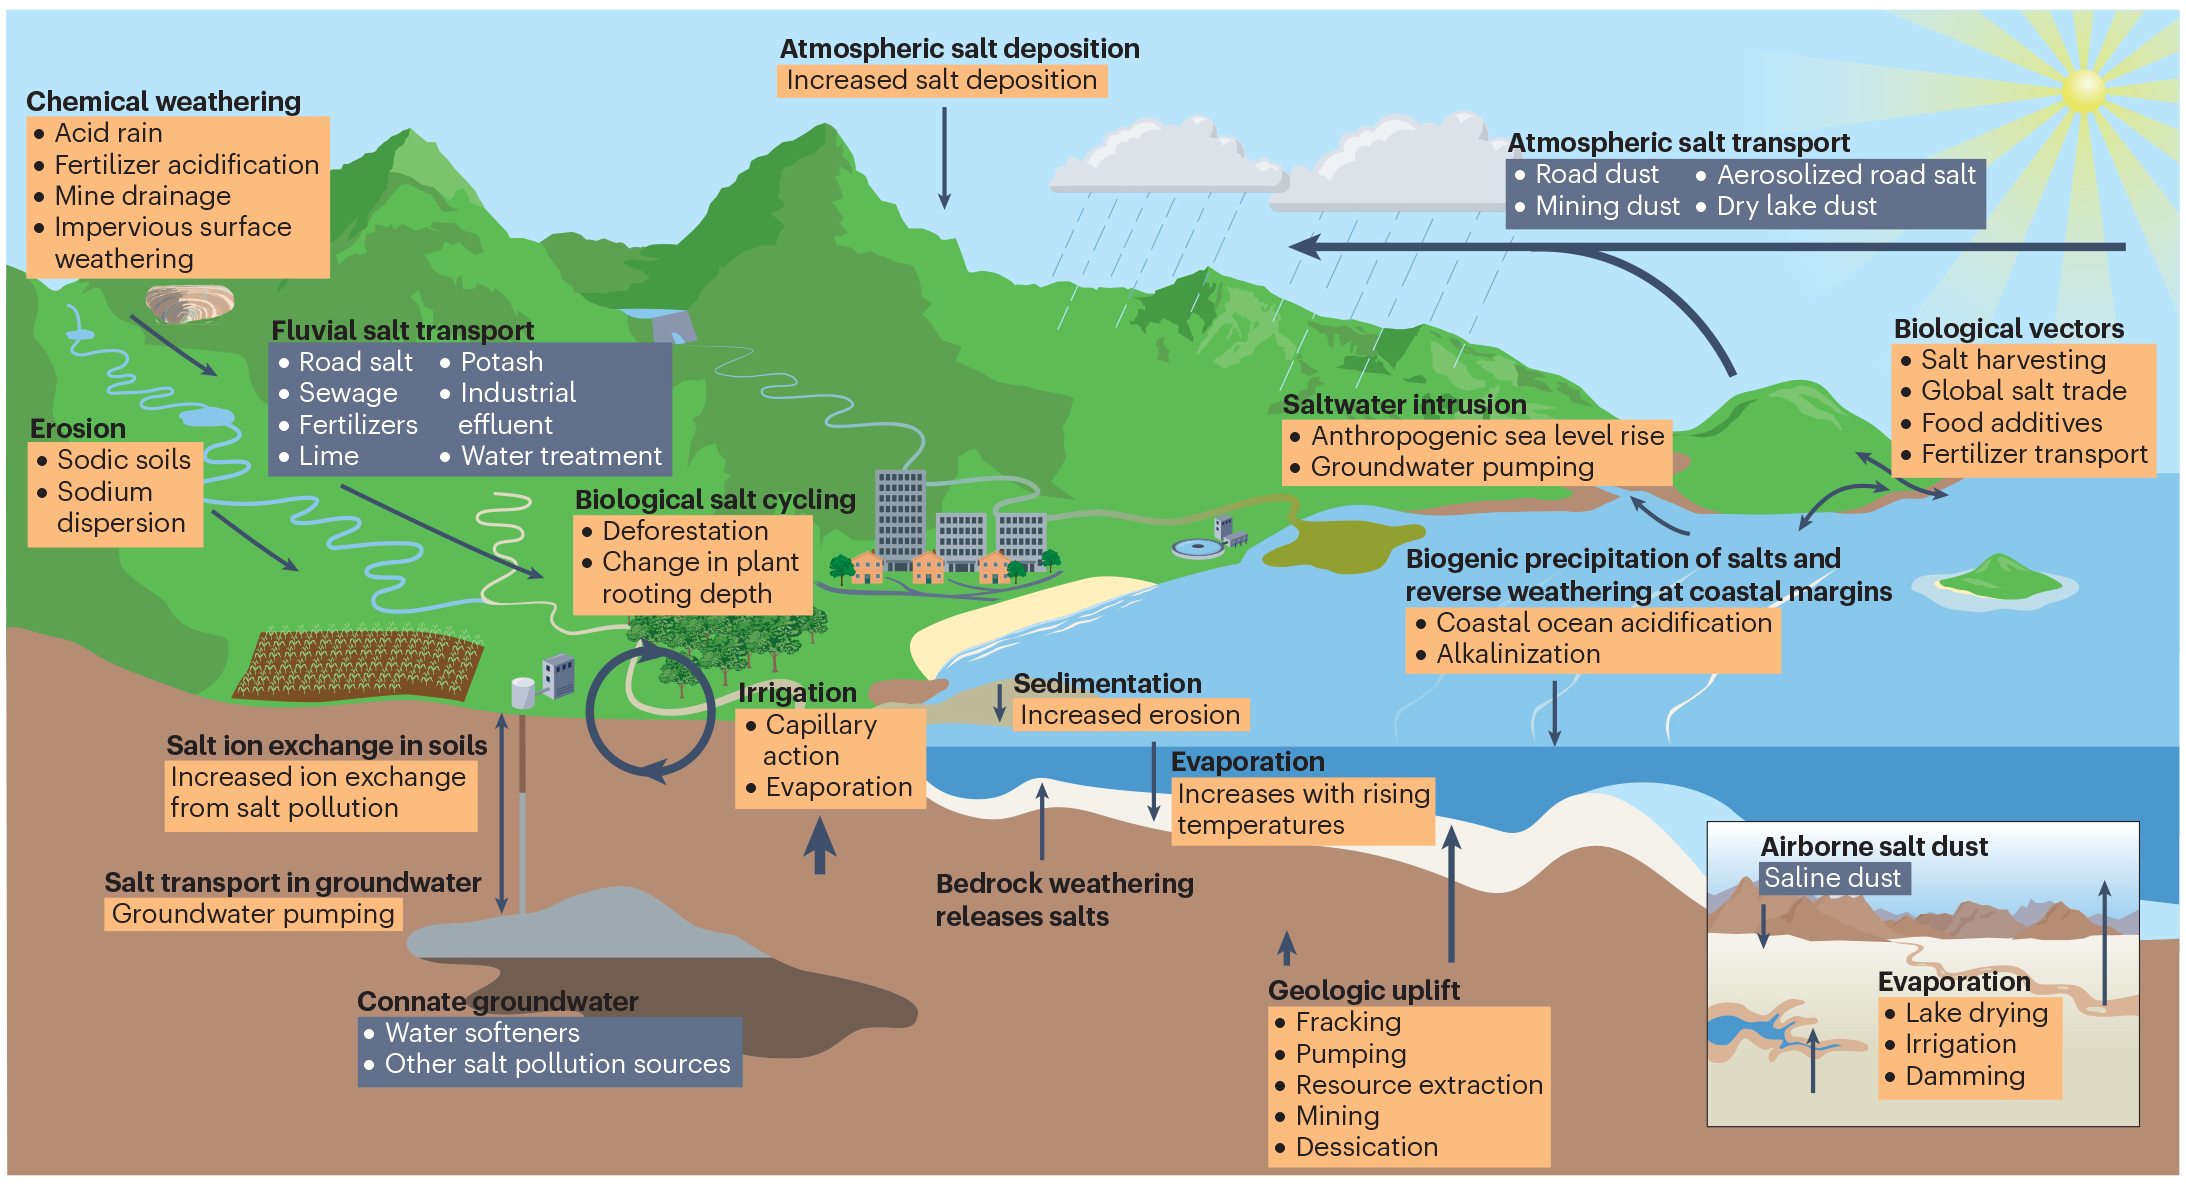 A diagram of the anthropogenic salt cycle of Earth.